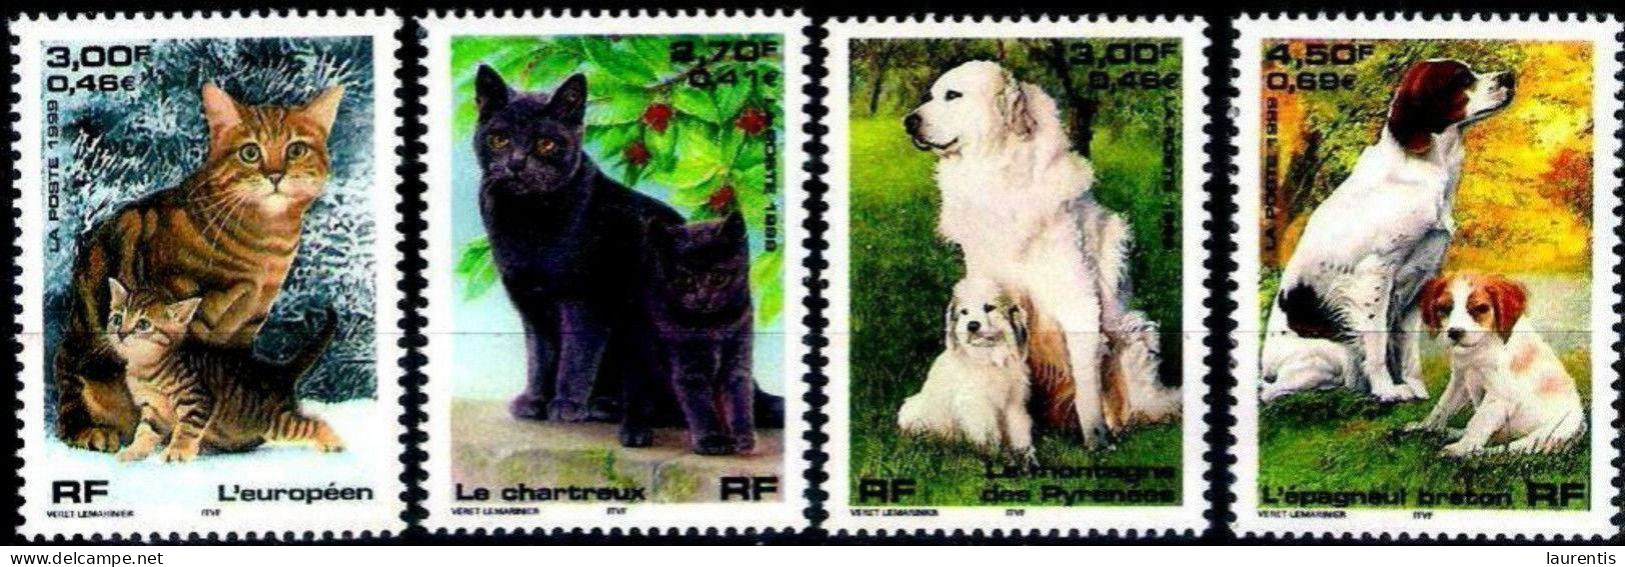 222  Cats - Chats - Dogs - Chiens - France 1999 - MNH - 2,25 - Chats Domestiques